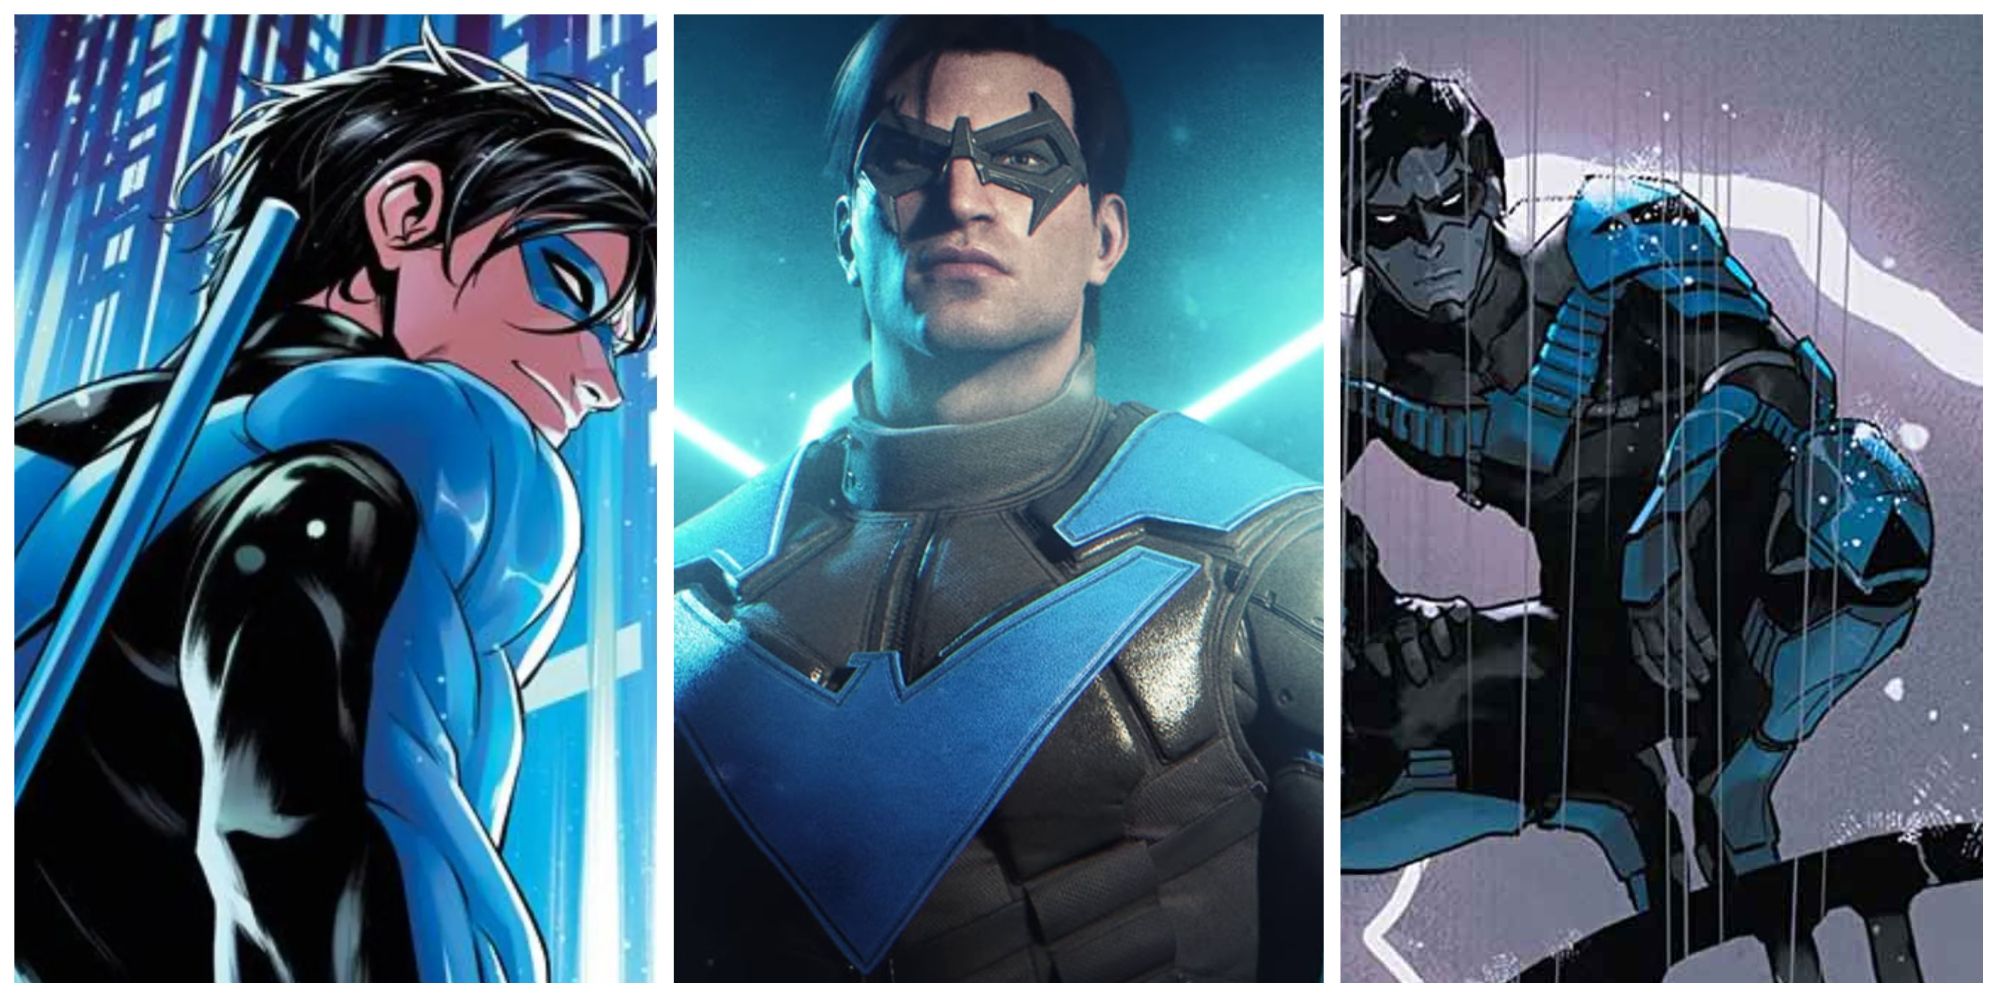 nightwing from dc comics and nightwing from gotham knights